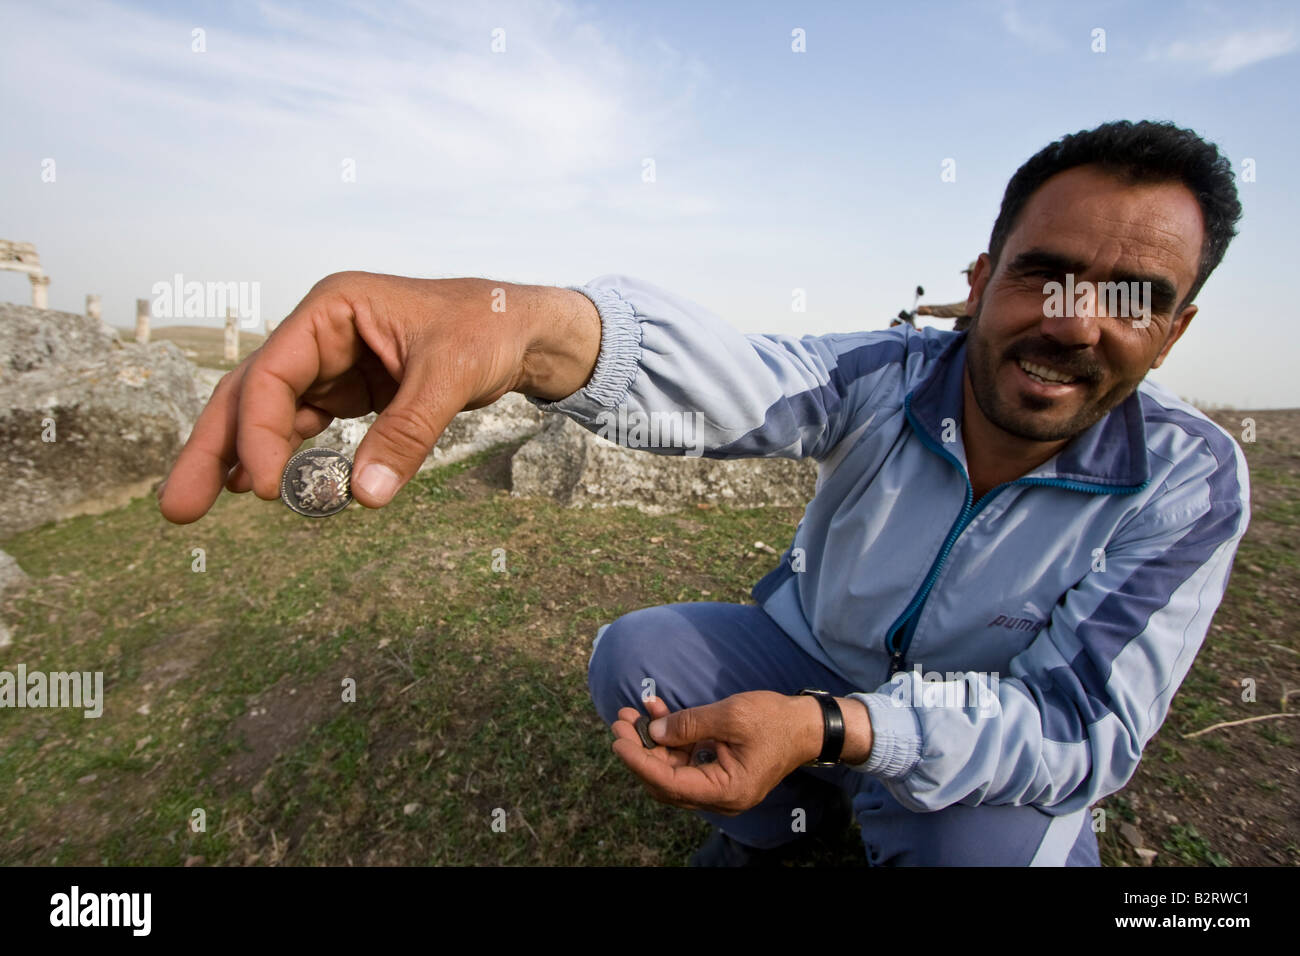 Man Selling Fake Ancient Roman Coins at the Roman Runis of Apamea in Syria Stock Photo